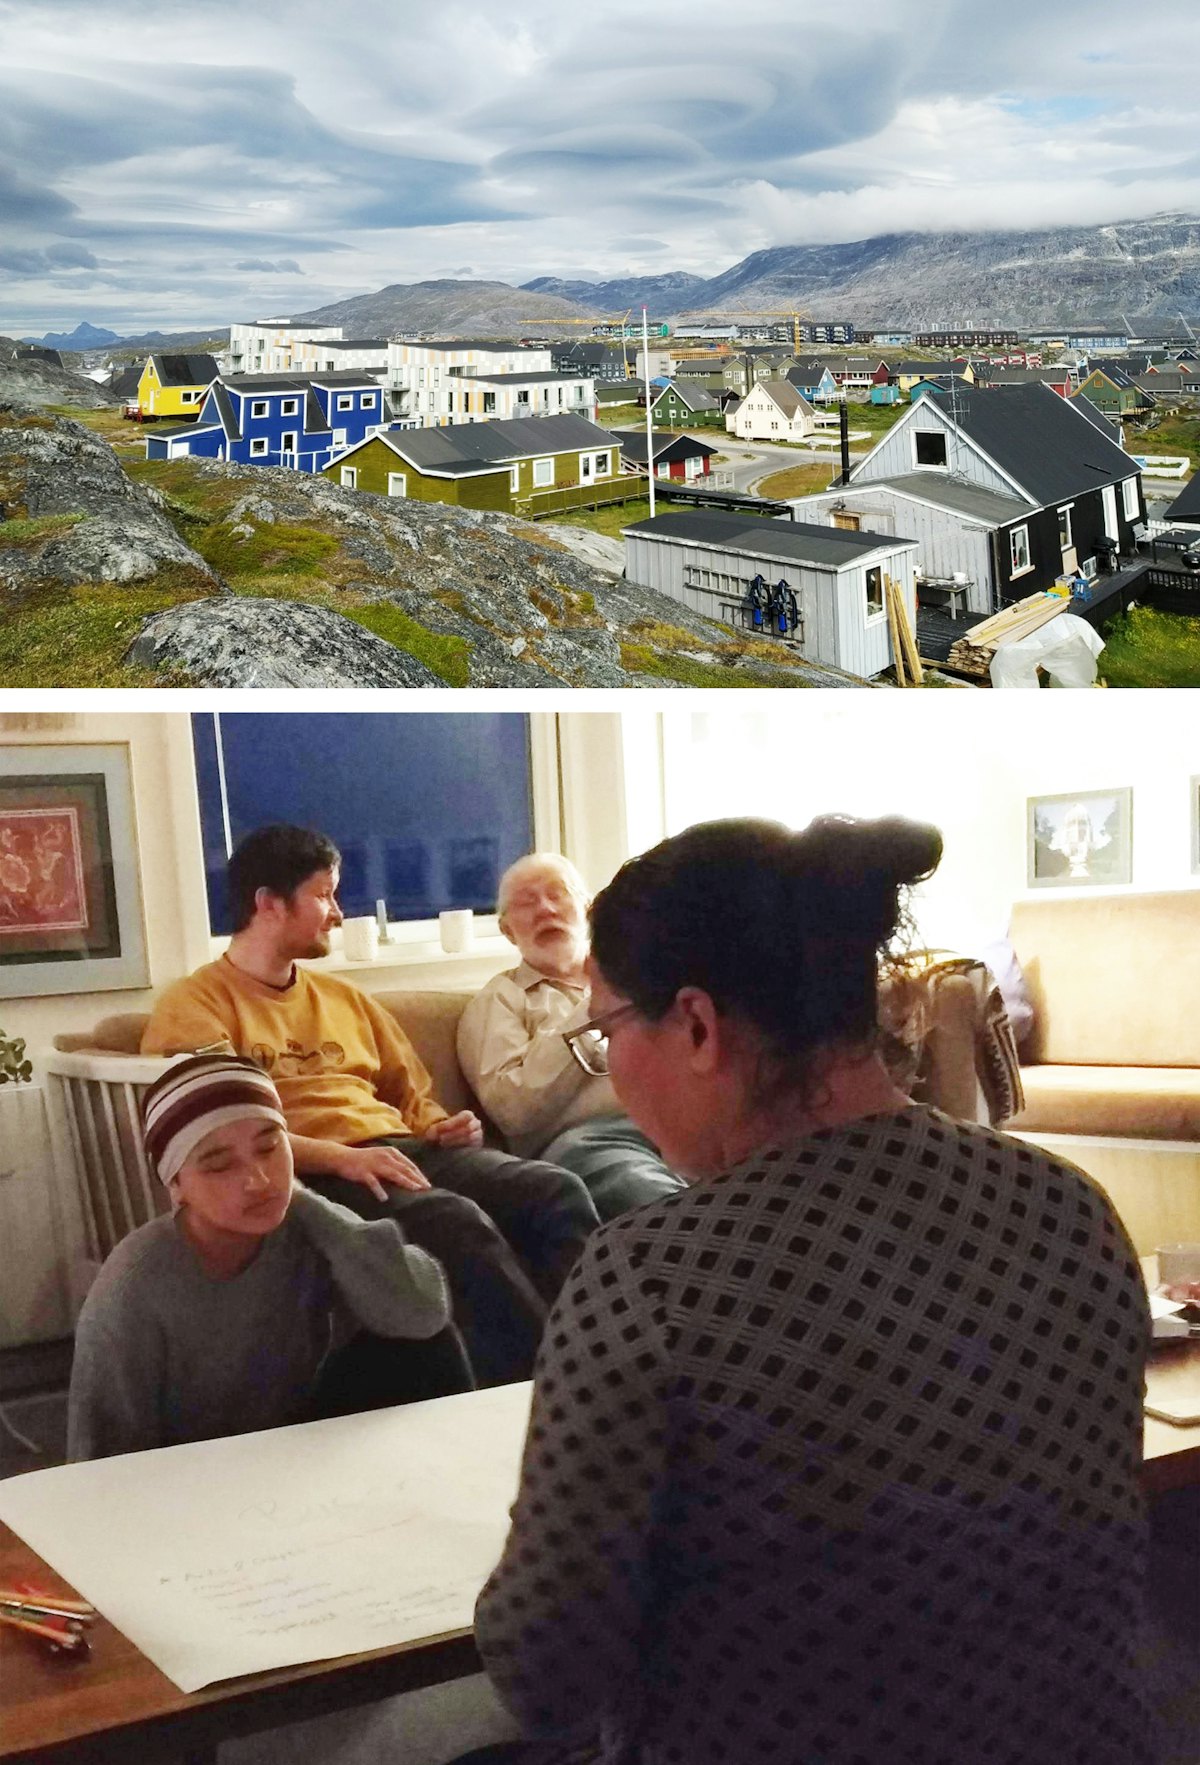 The community of Nuuk, Greenland, has also been preparing for the upcoming bicentenary. At a recent gathering, participants explored ideas for how to commemorate the Bab’s bicentenary. “The spiritual atmosphere was so wonderful,” a community member expressed.